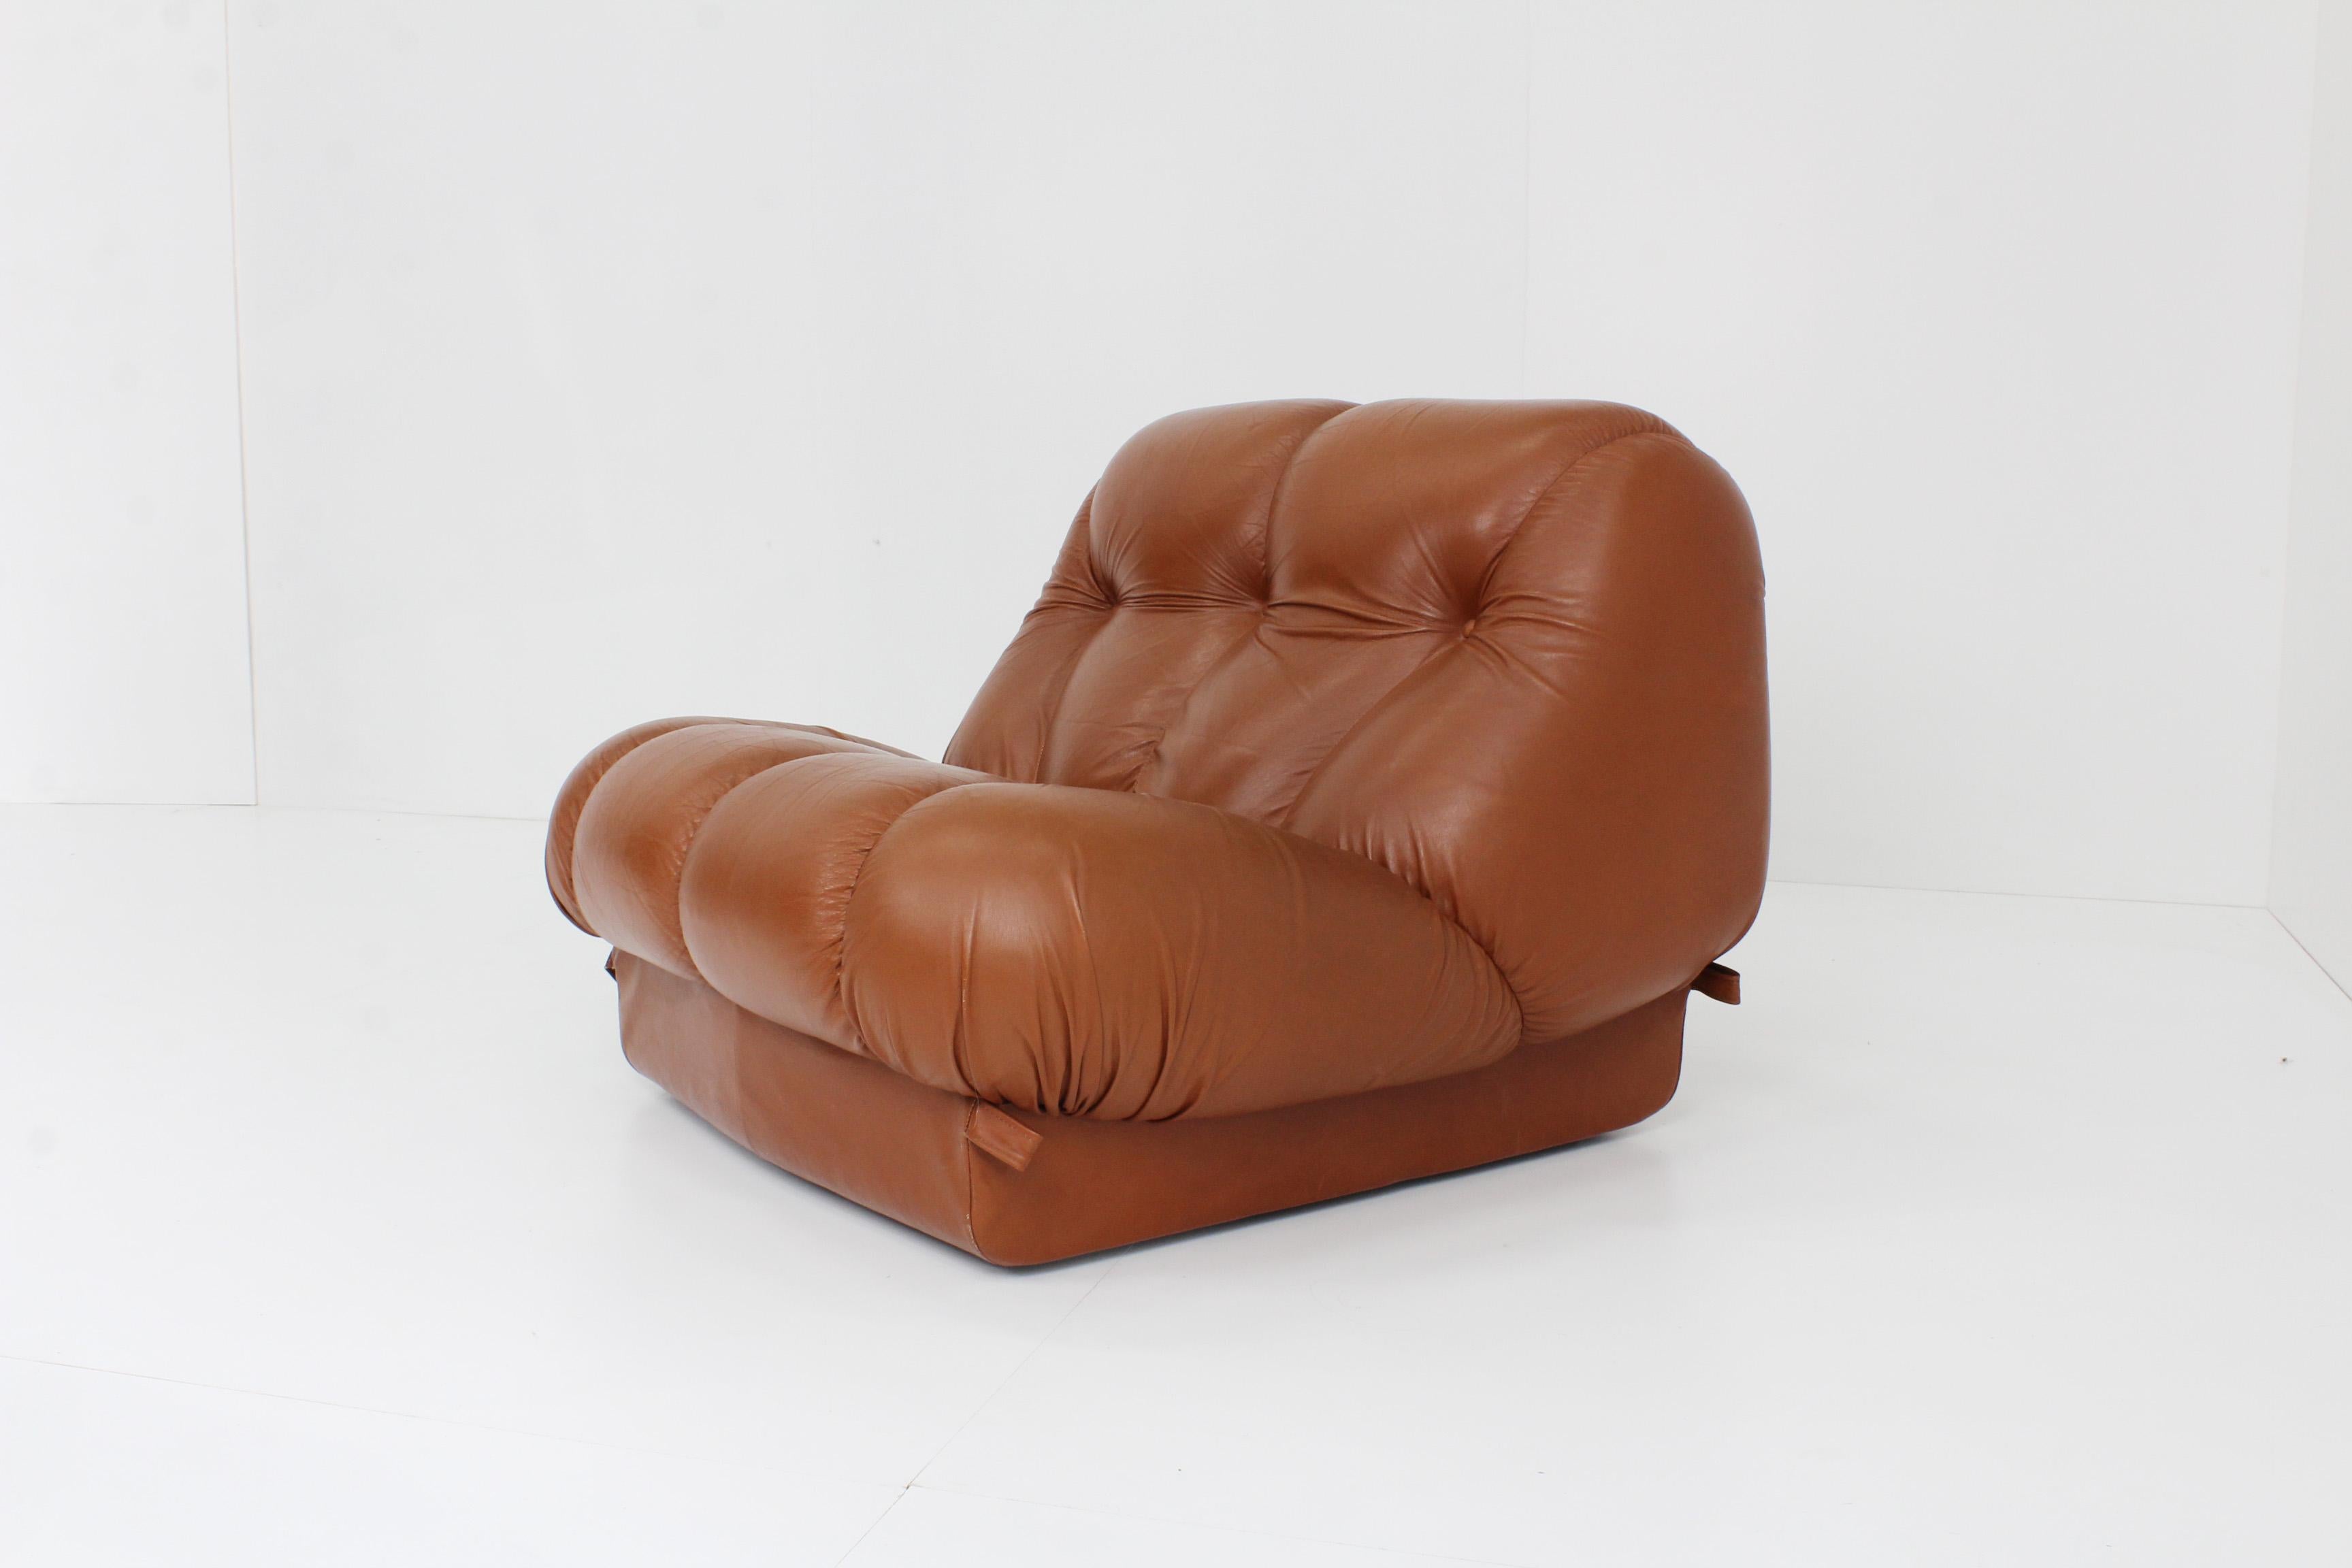 Nuvolone lounge chair from Italy designed by Rino Maturi and produced by Mimo Padova in the 1970s.

Original cognac leather. Internal structure in polyurethane foam. 
This design is inspired by clouds, from which the chair derrives its name.